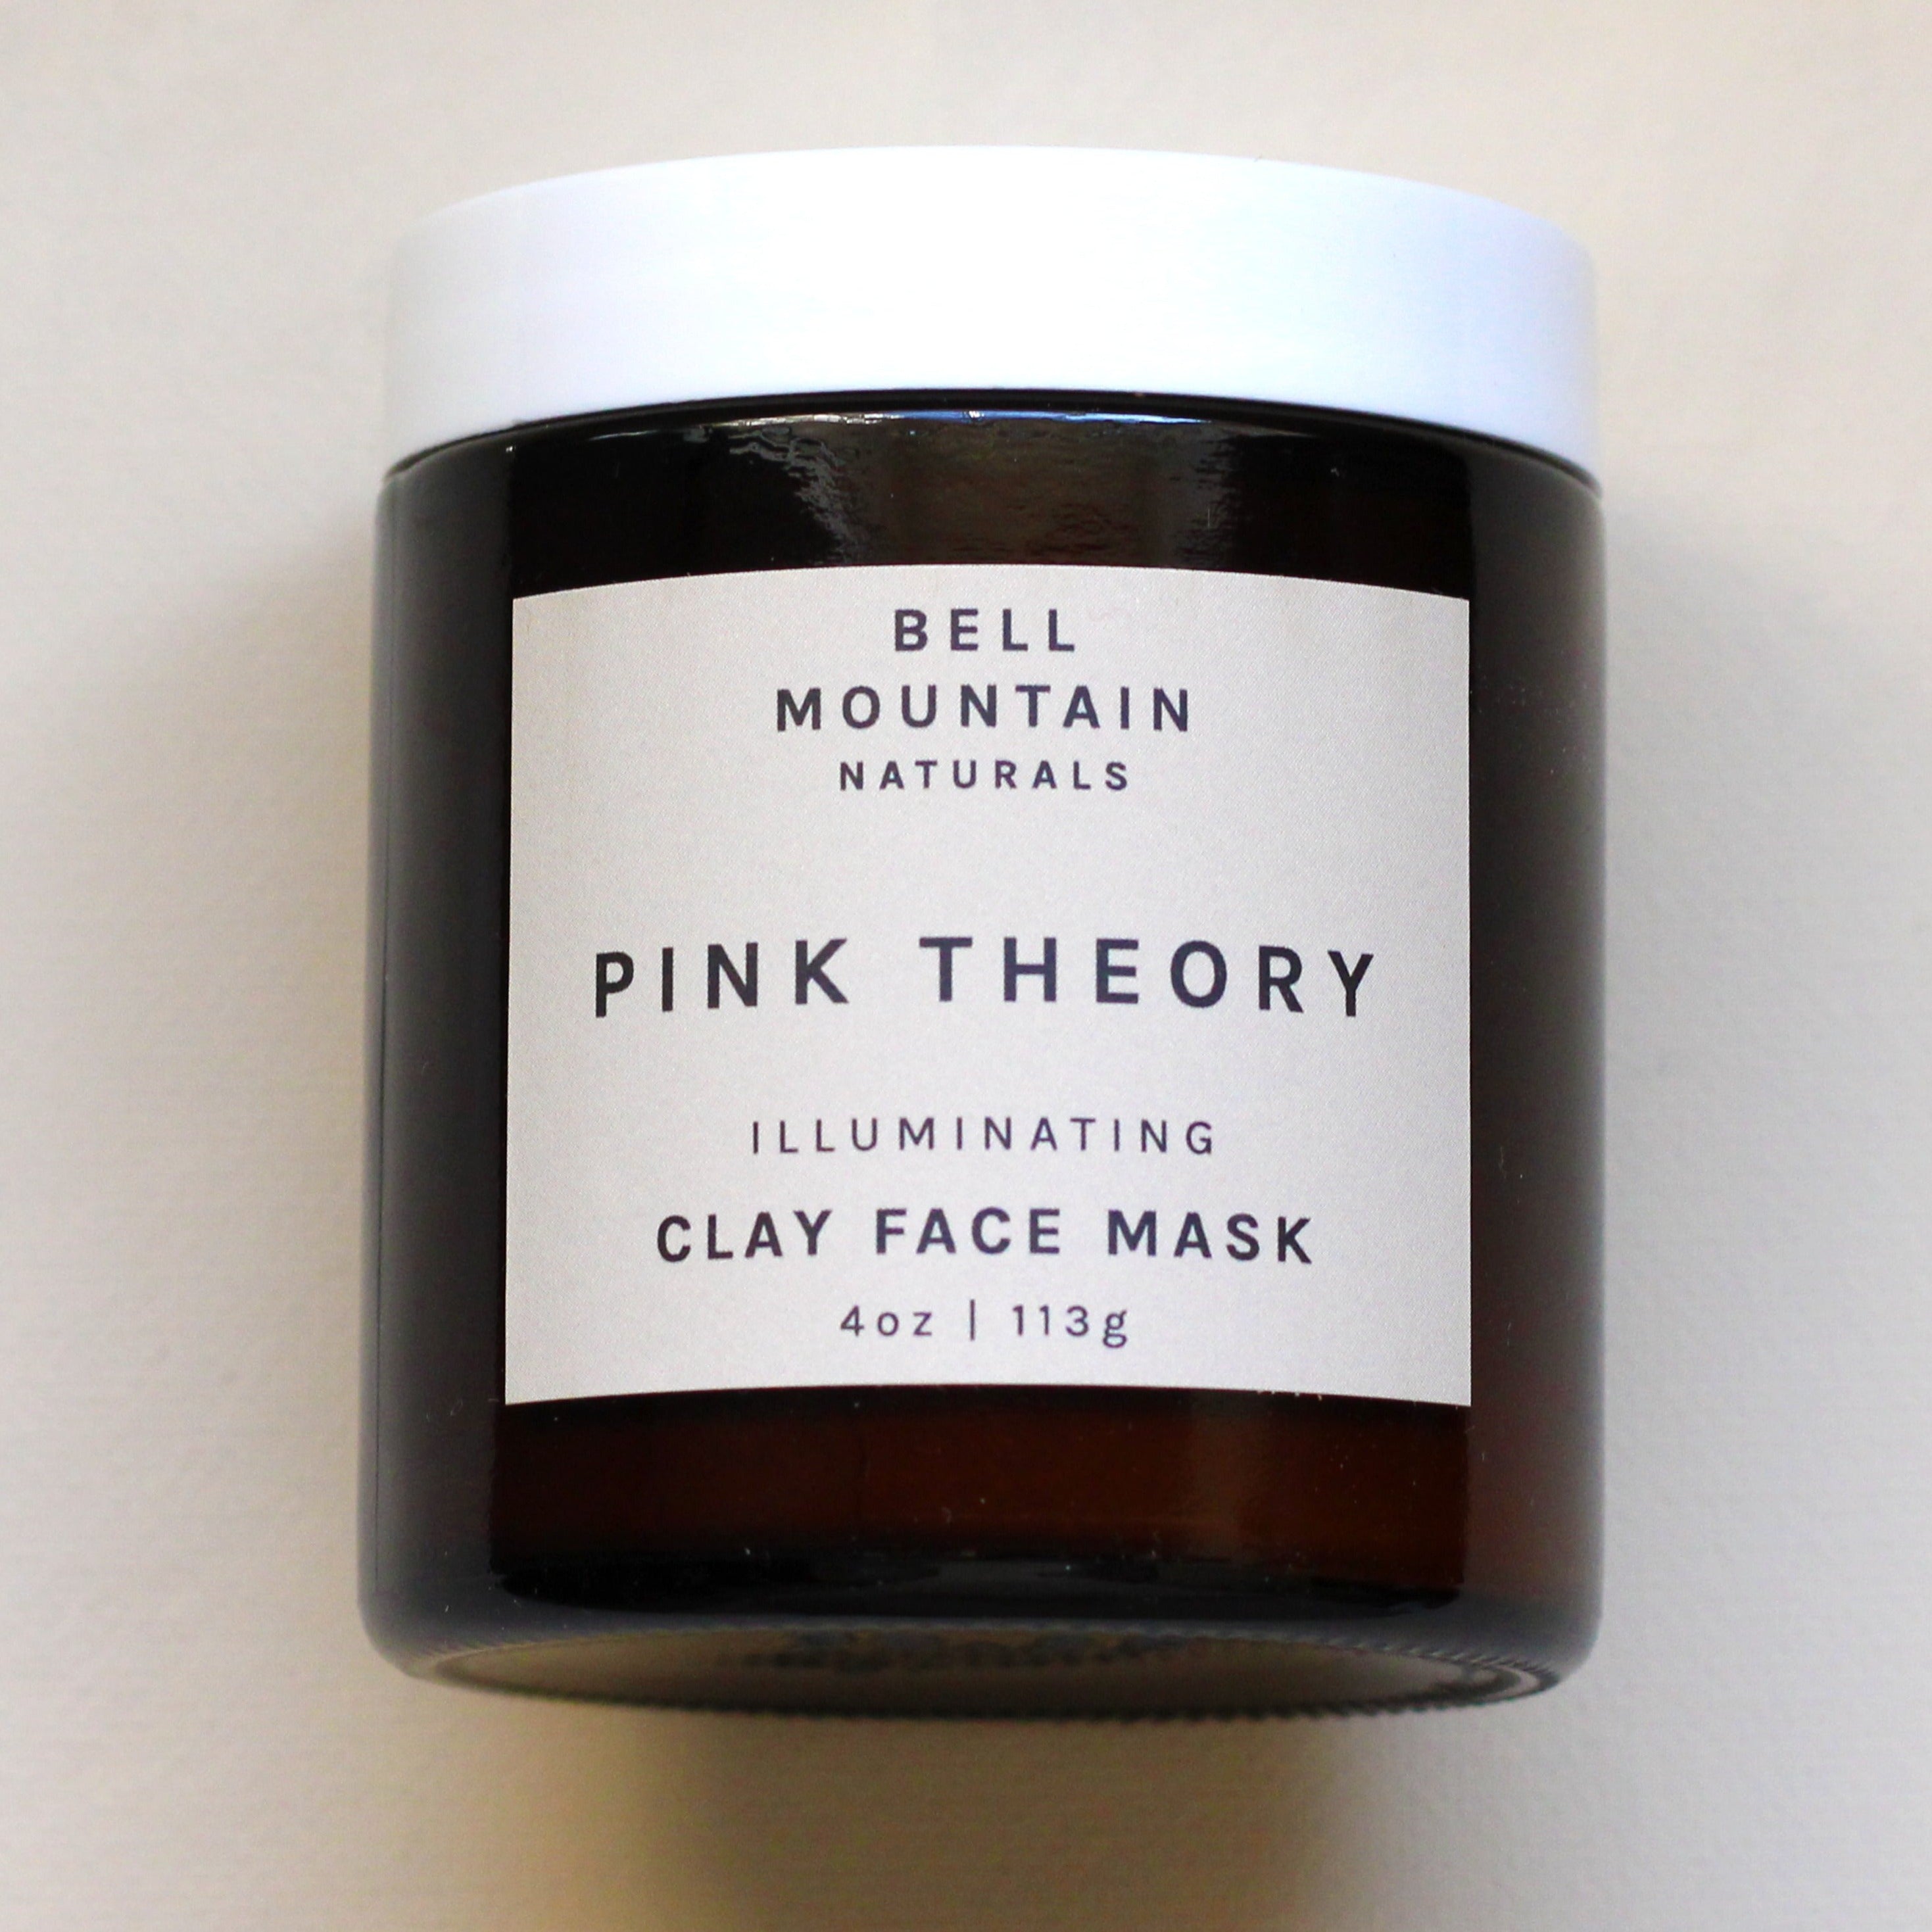 Bell Mountain Naturals Pink Theory Clay Face Mask | Well-Taylored Co.